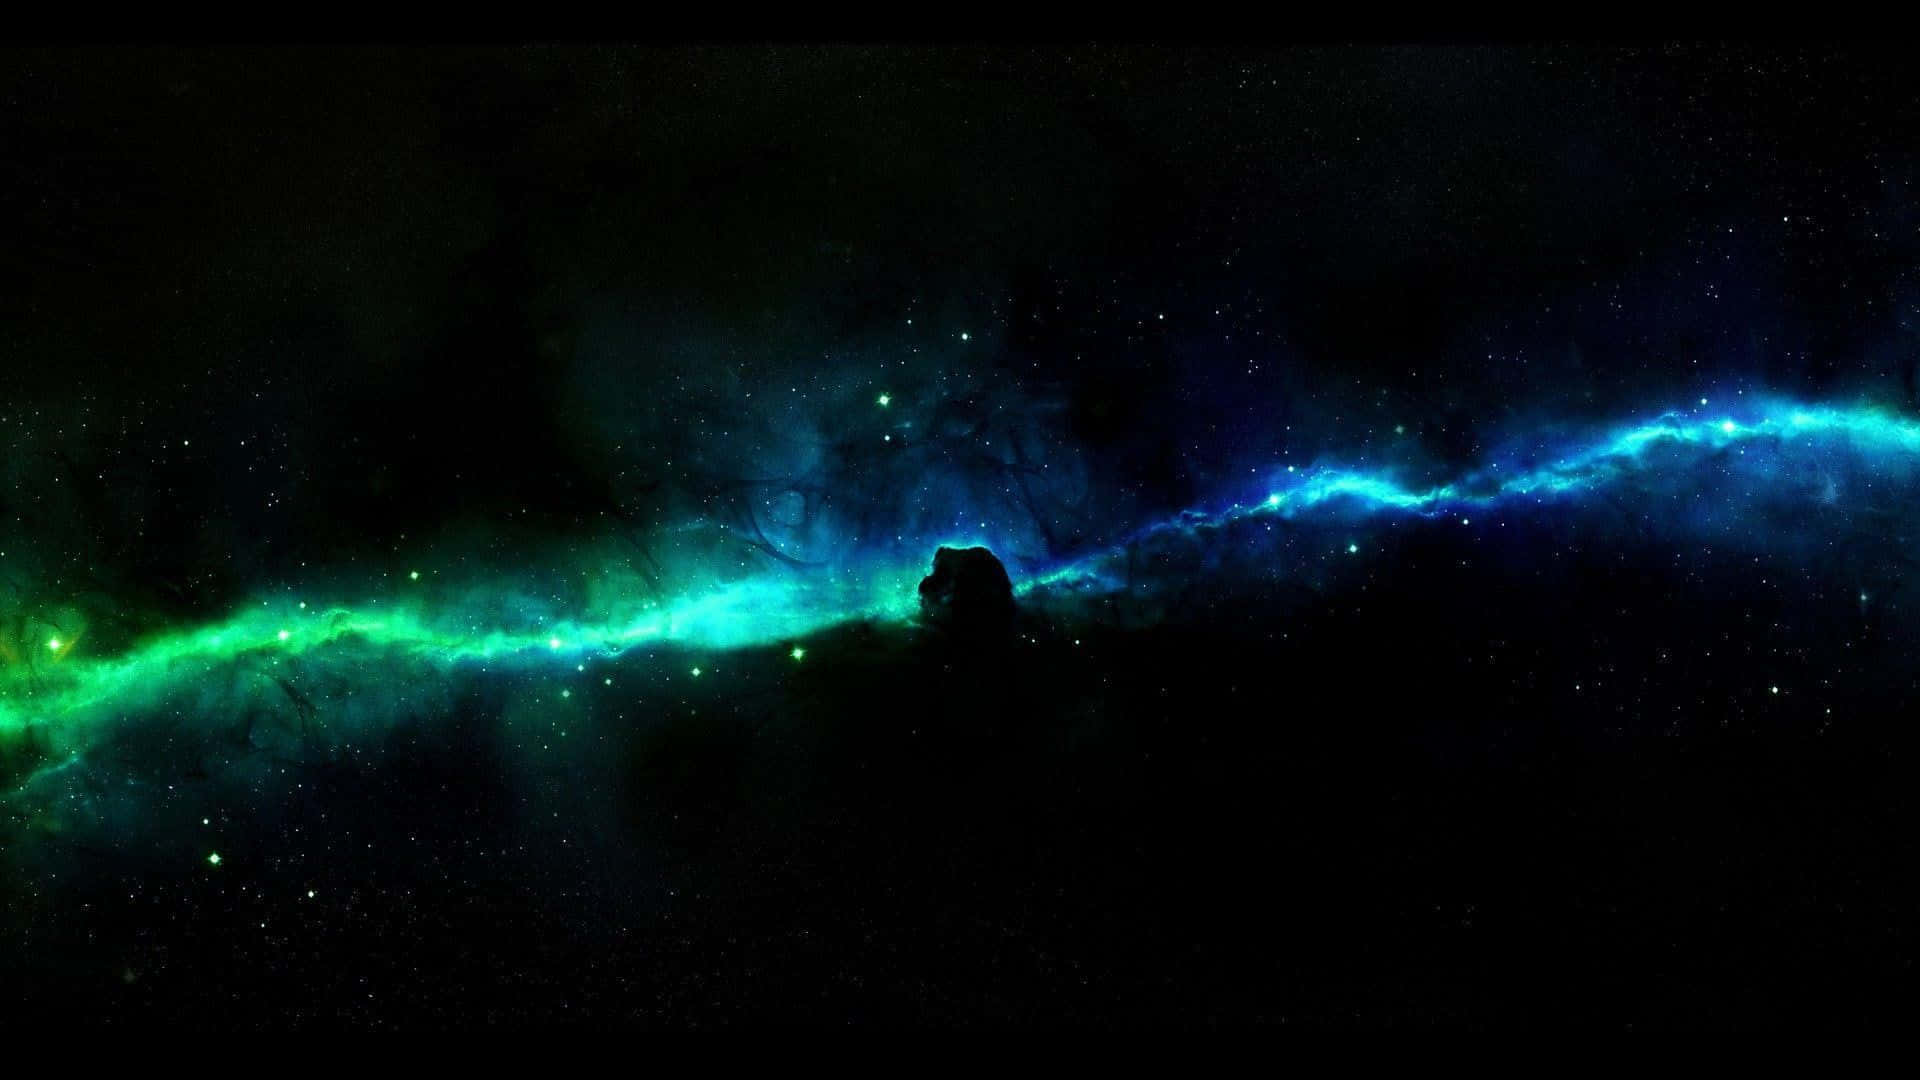 Take A Journey With The Green Galaxy Wallpaper